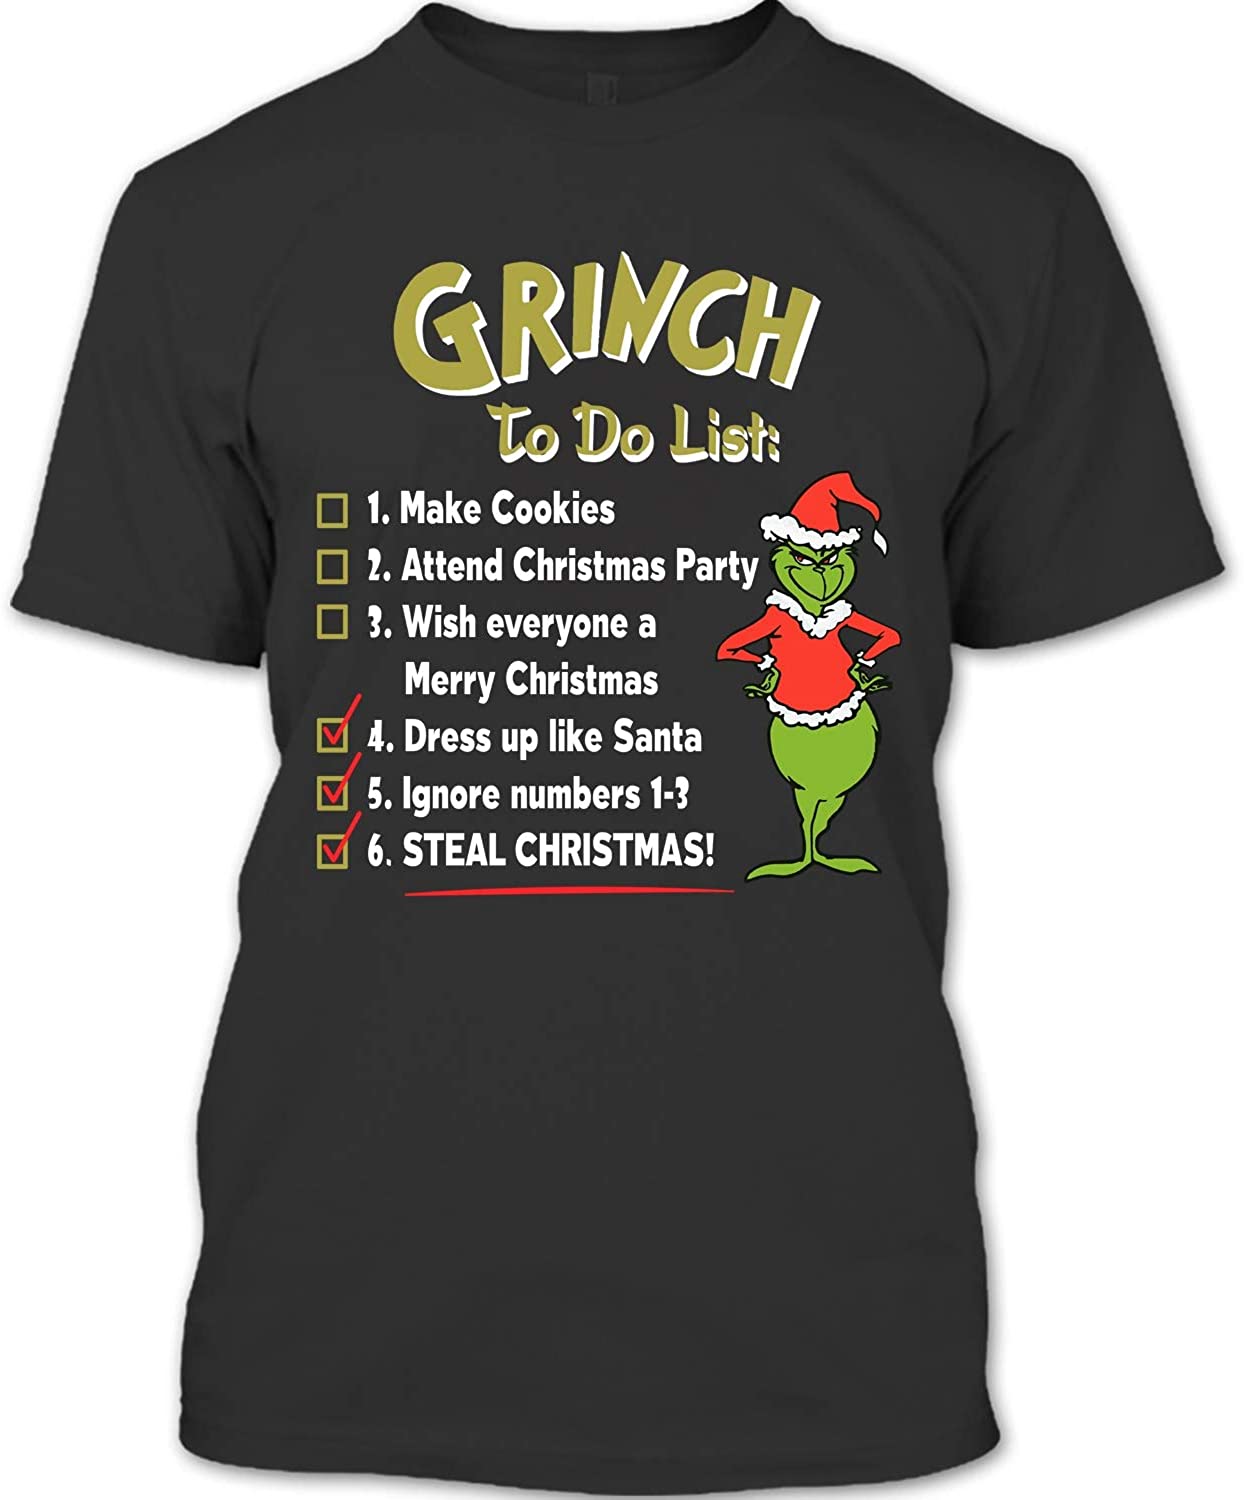 The Grinch To Do List Dress Up Like Santa Steal Christmas Unisex T ...